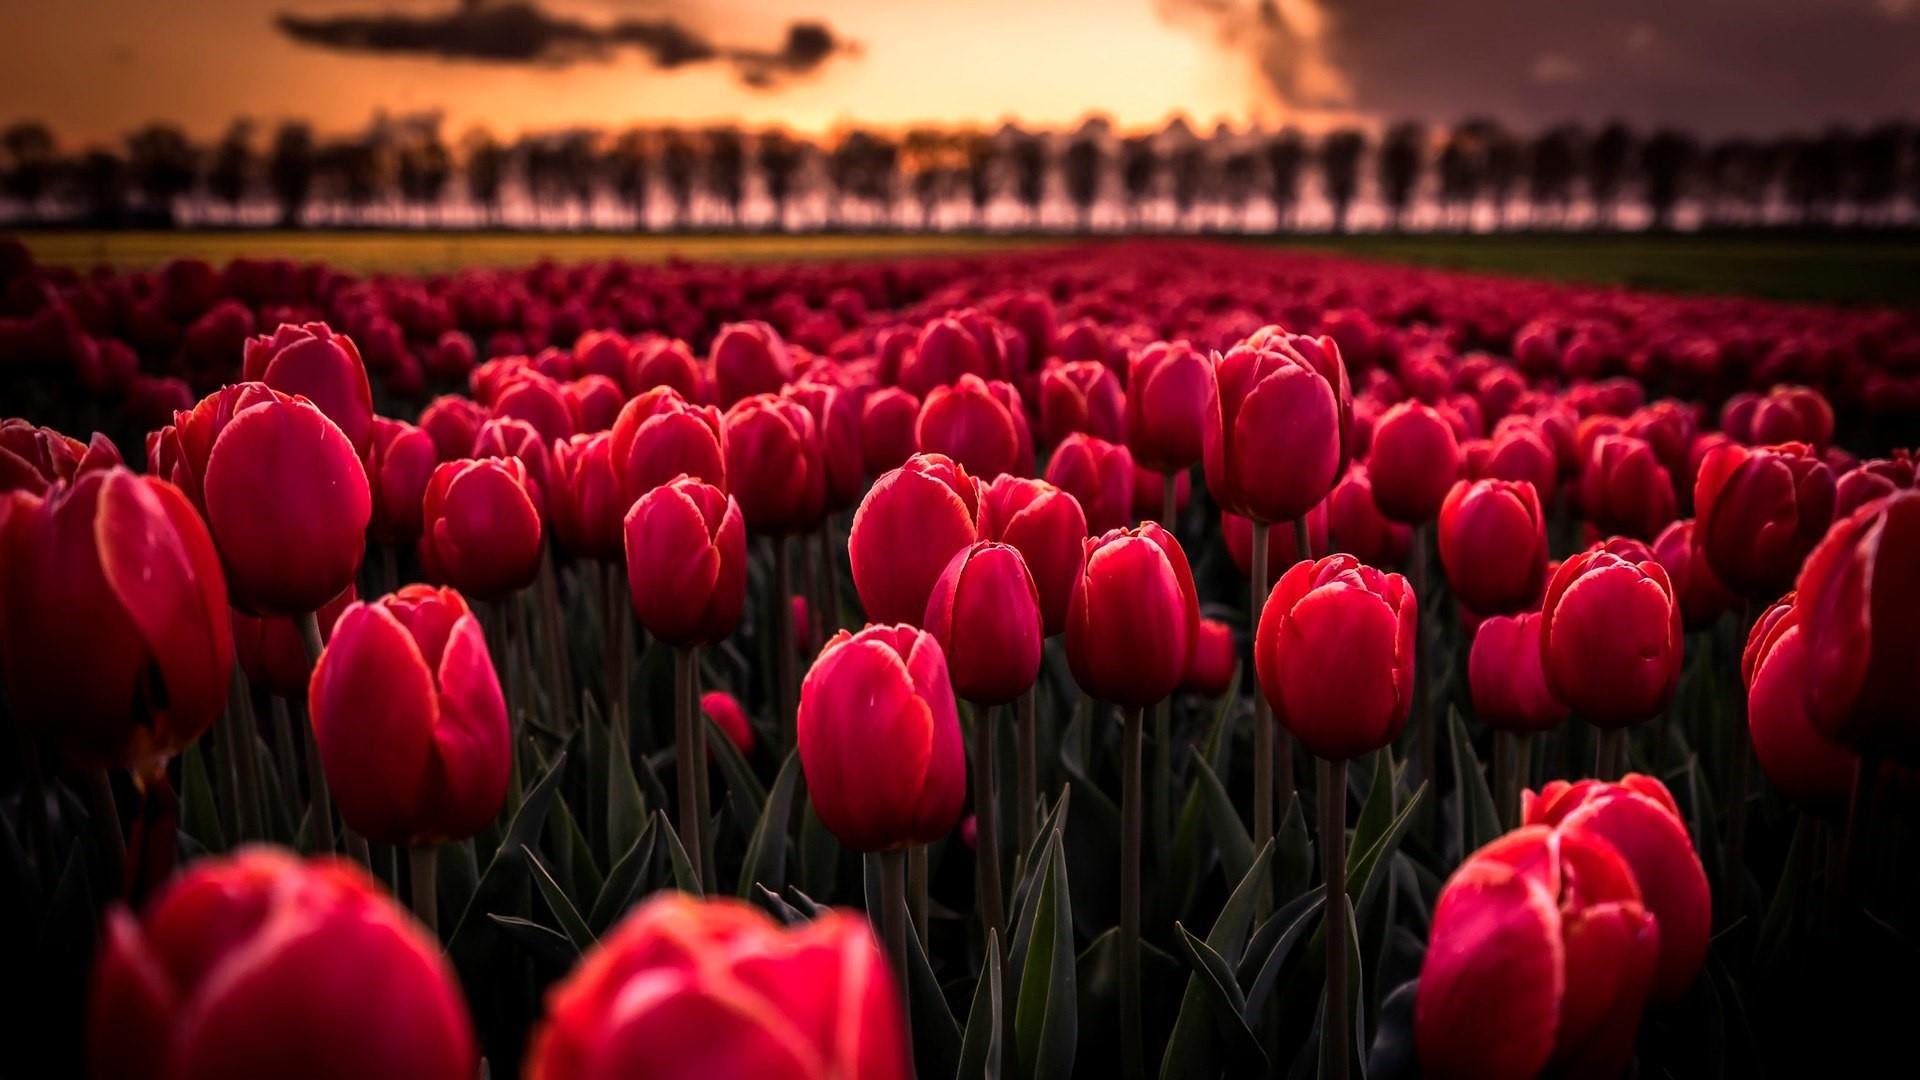 A field of red tulips with the sun setting - Tulip